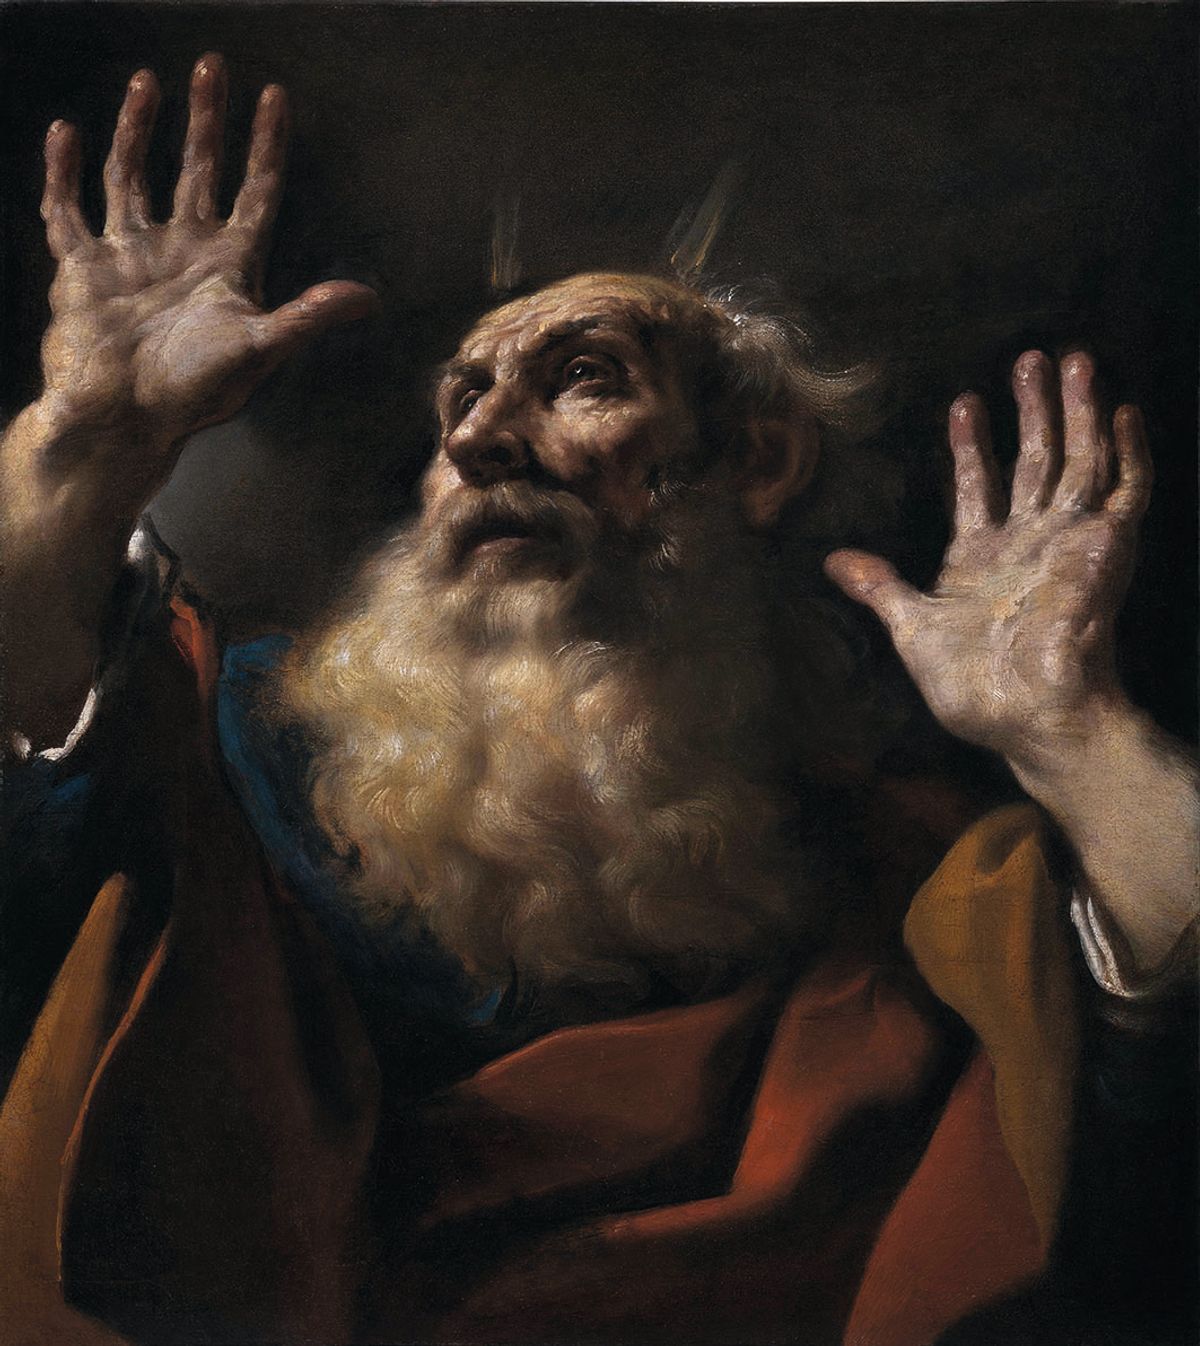 Guercino’s Moses (around 1618-19). The painting will be on permanent show with the artist’s King David

Photo: Courtesy of Moretti Gallery